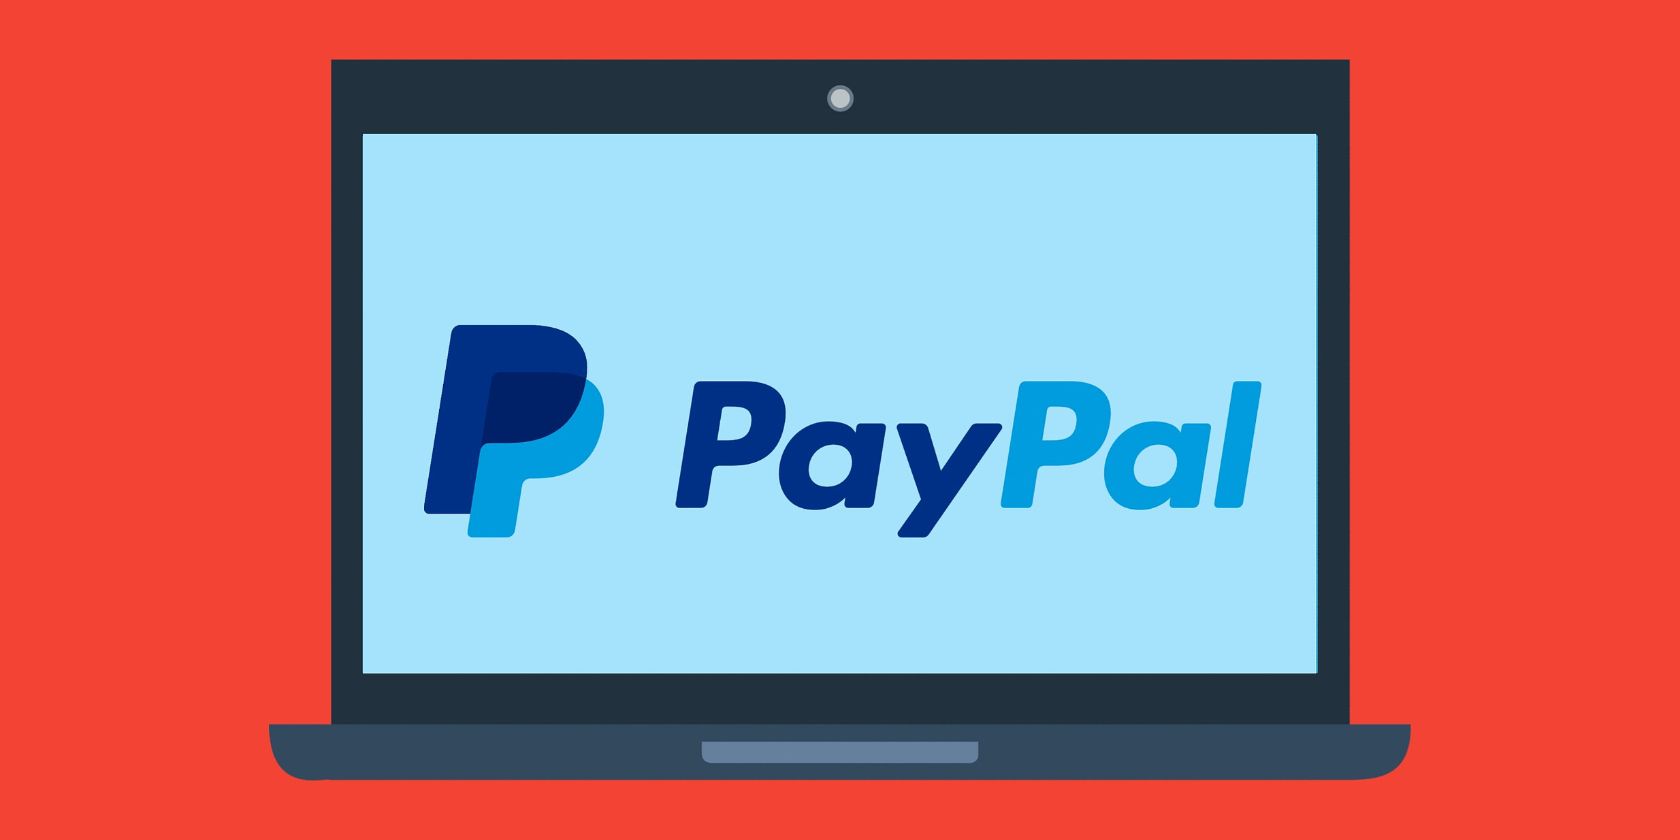 A graphic of the PayPal logo on a laptop